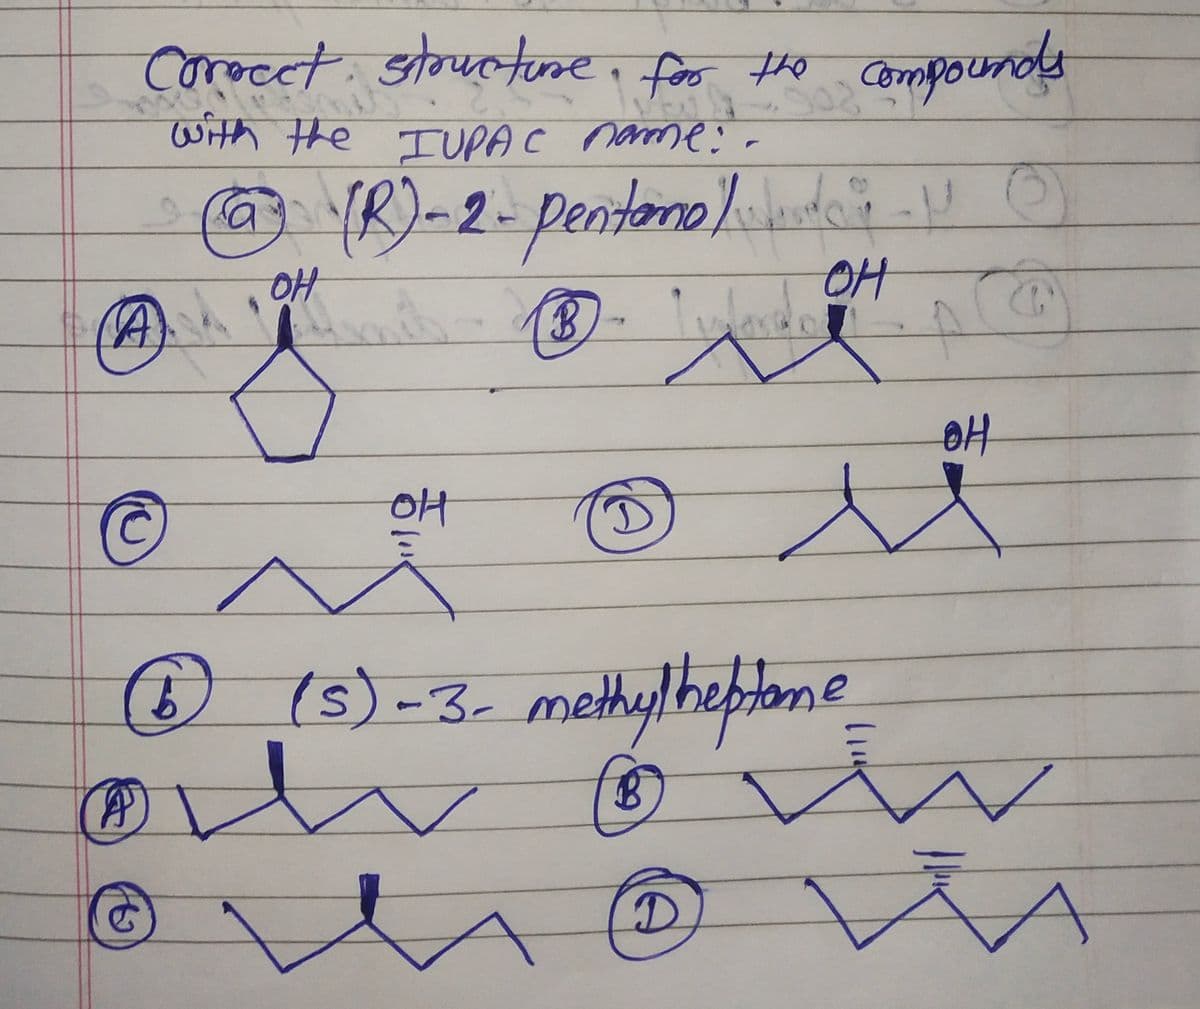 Correct structure for the compounds
with the IUPAC name:
@@ (R)-2- pentono)do VO
OH
(A)
C
6)
P
OH
...
B
4
20
он
o u
D
D
(5) -3-methylheptane
~
B
OH
(1)
1
A